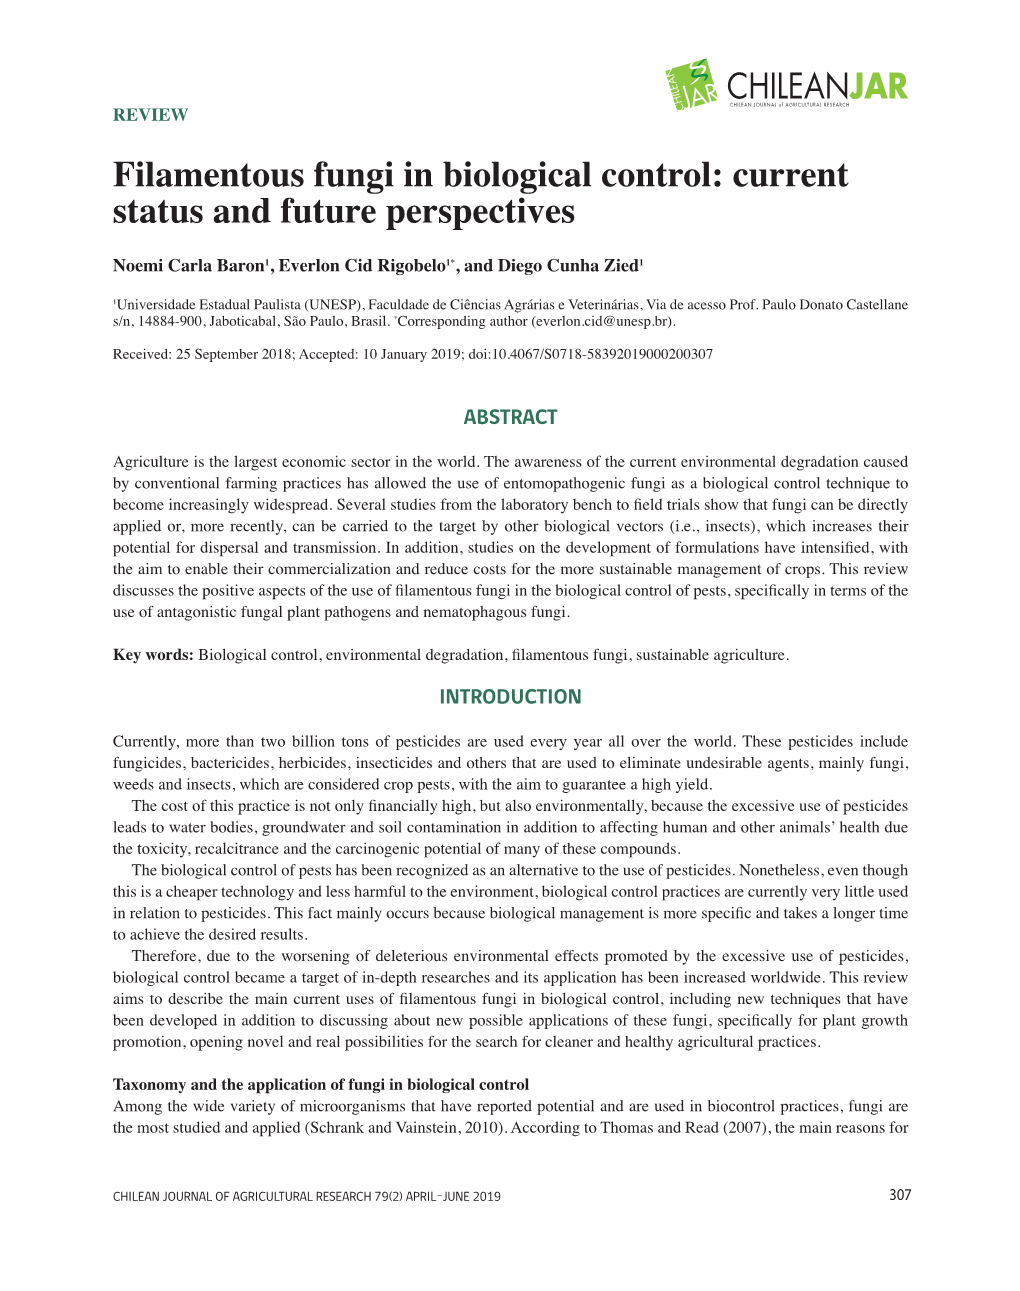 Filamentous Fungi in Biological Control: Current Status and Future Perspectives